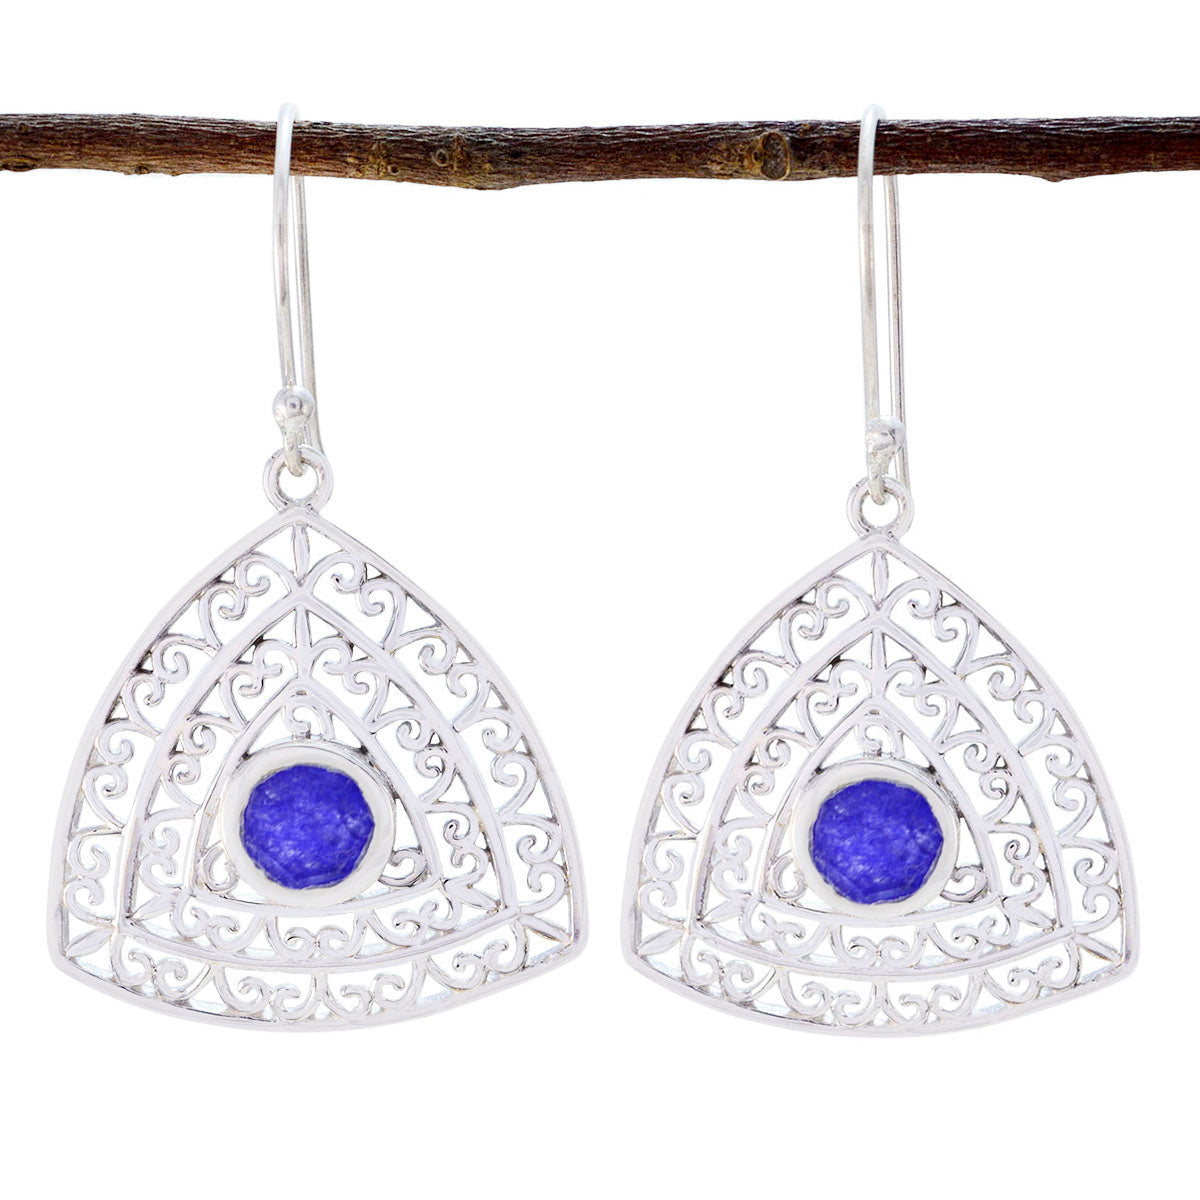 Riyo Genuine Gems round Faceted Nevy Blue Indian Shappire Silver Earrings labour day gift